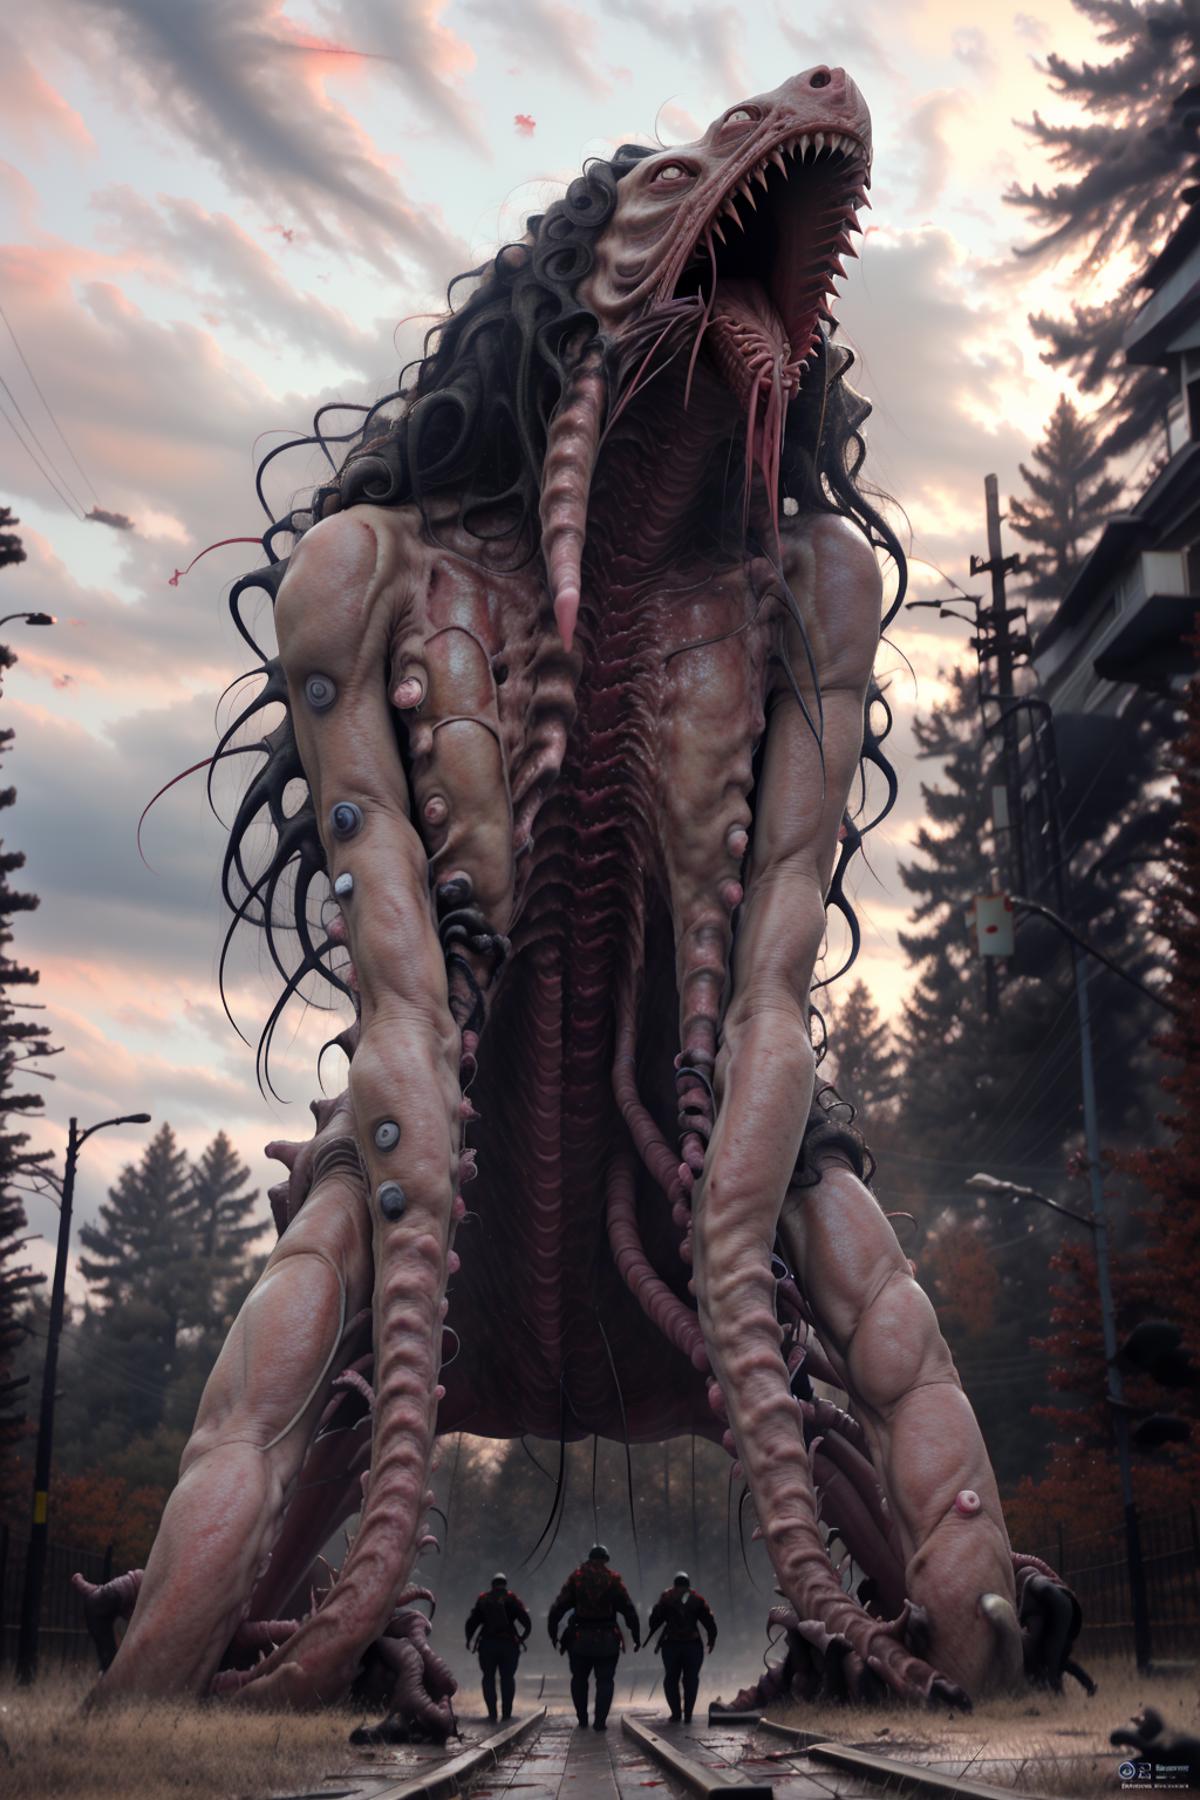 A grotesque creature with multiple tentacles and a large mouth stands in front of trees.